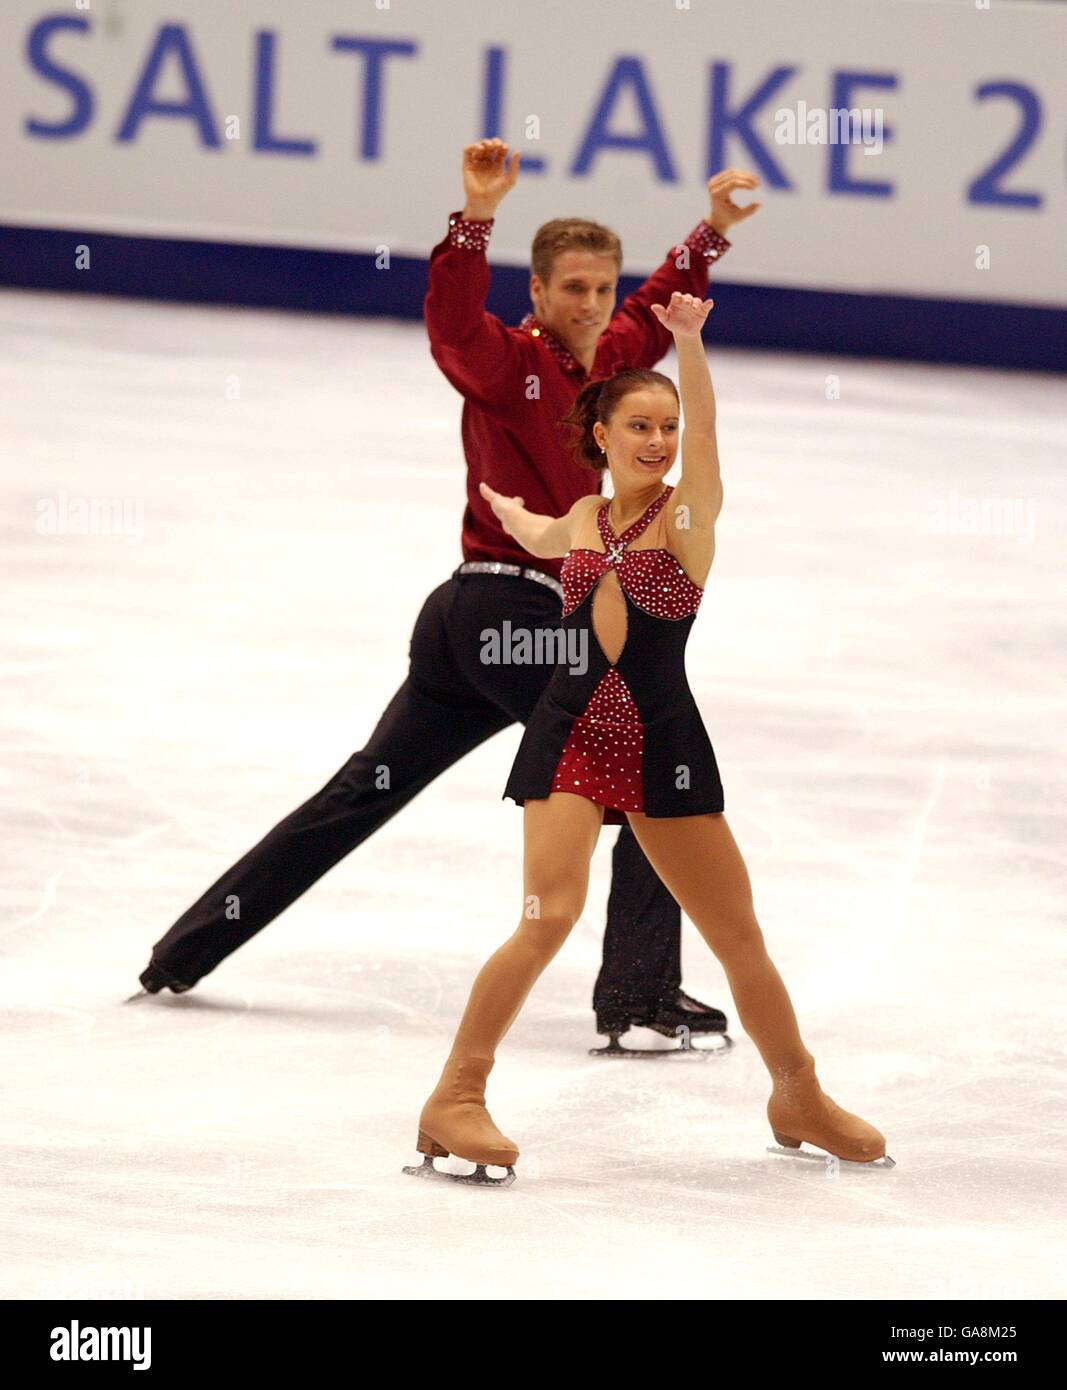 Winter Olympics - Salt Lake City 2002 - Figure Skating - Pairs Short Programme. Germany's Mariana Kautz and partner Norman Jeschke in action during the pairs short programme Stock Photo